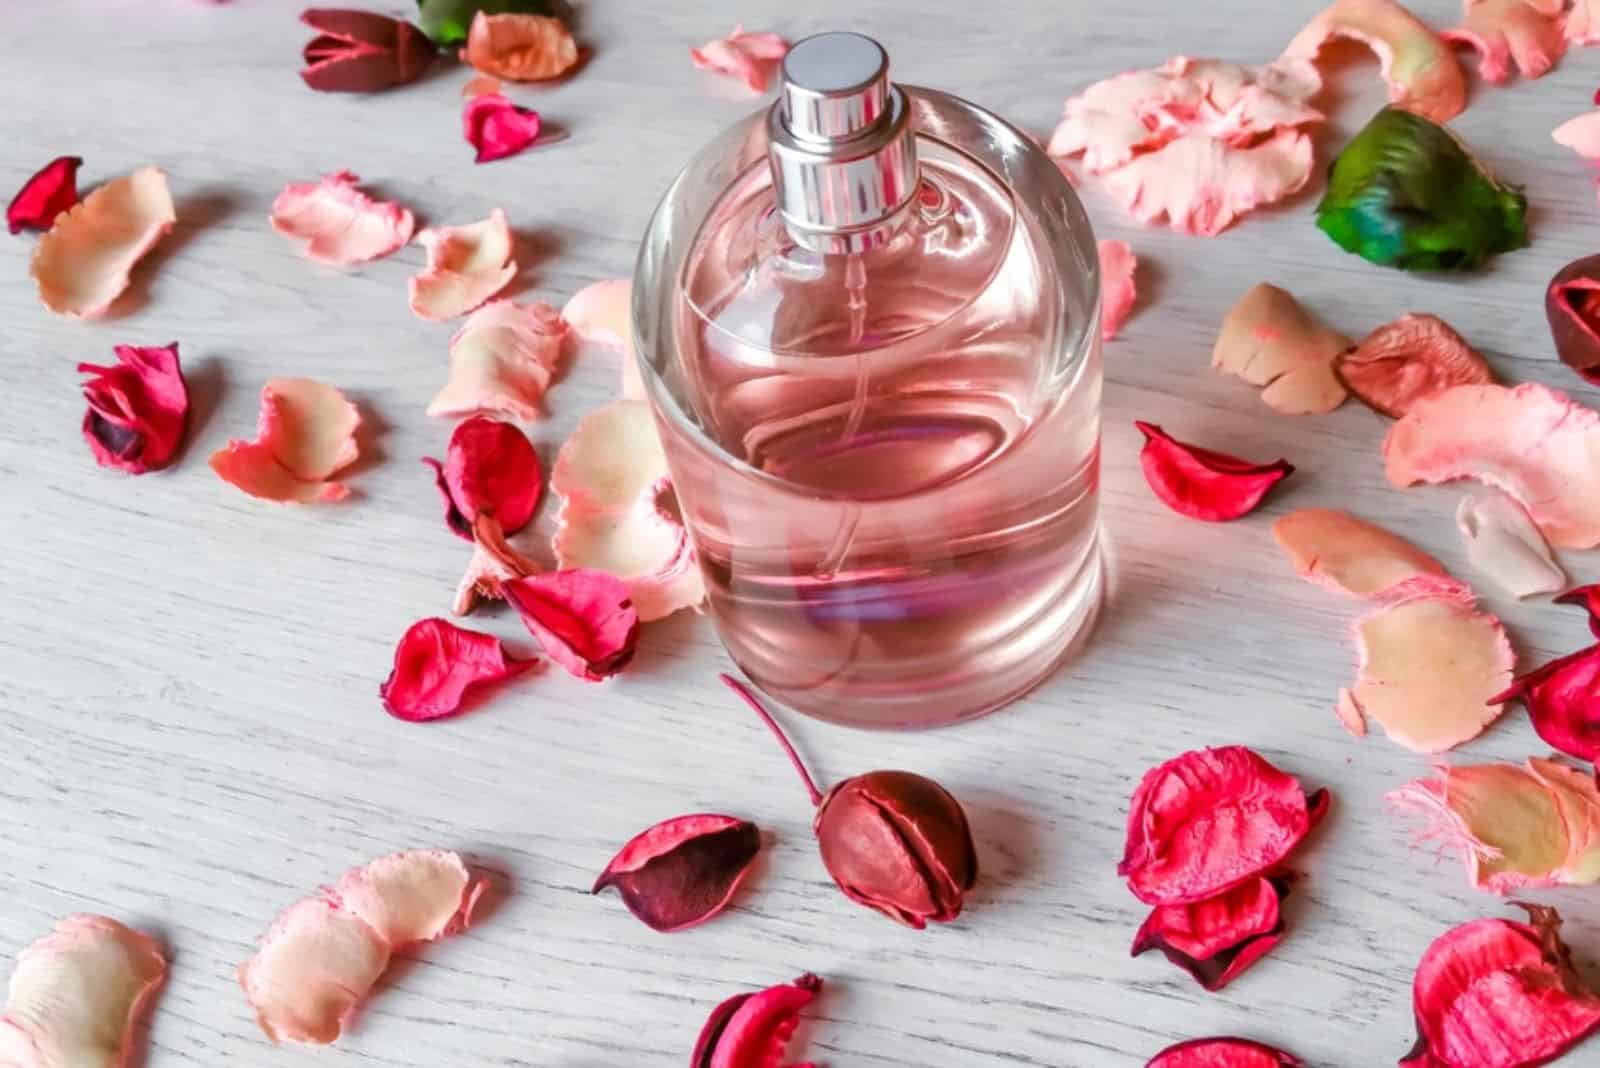 Perfume bottle with a delicate pink fragrance and rose petals